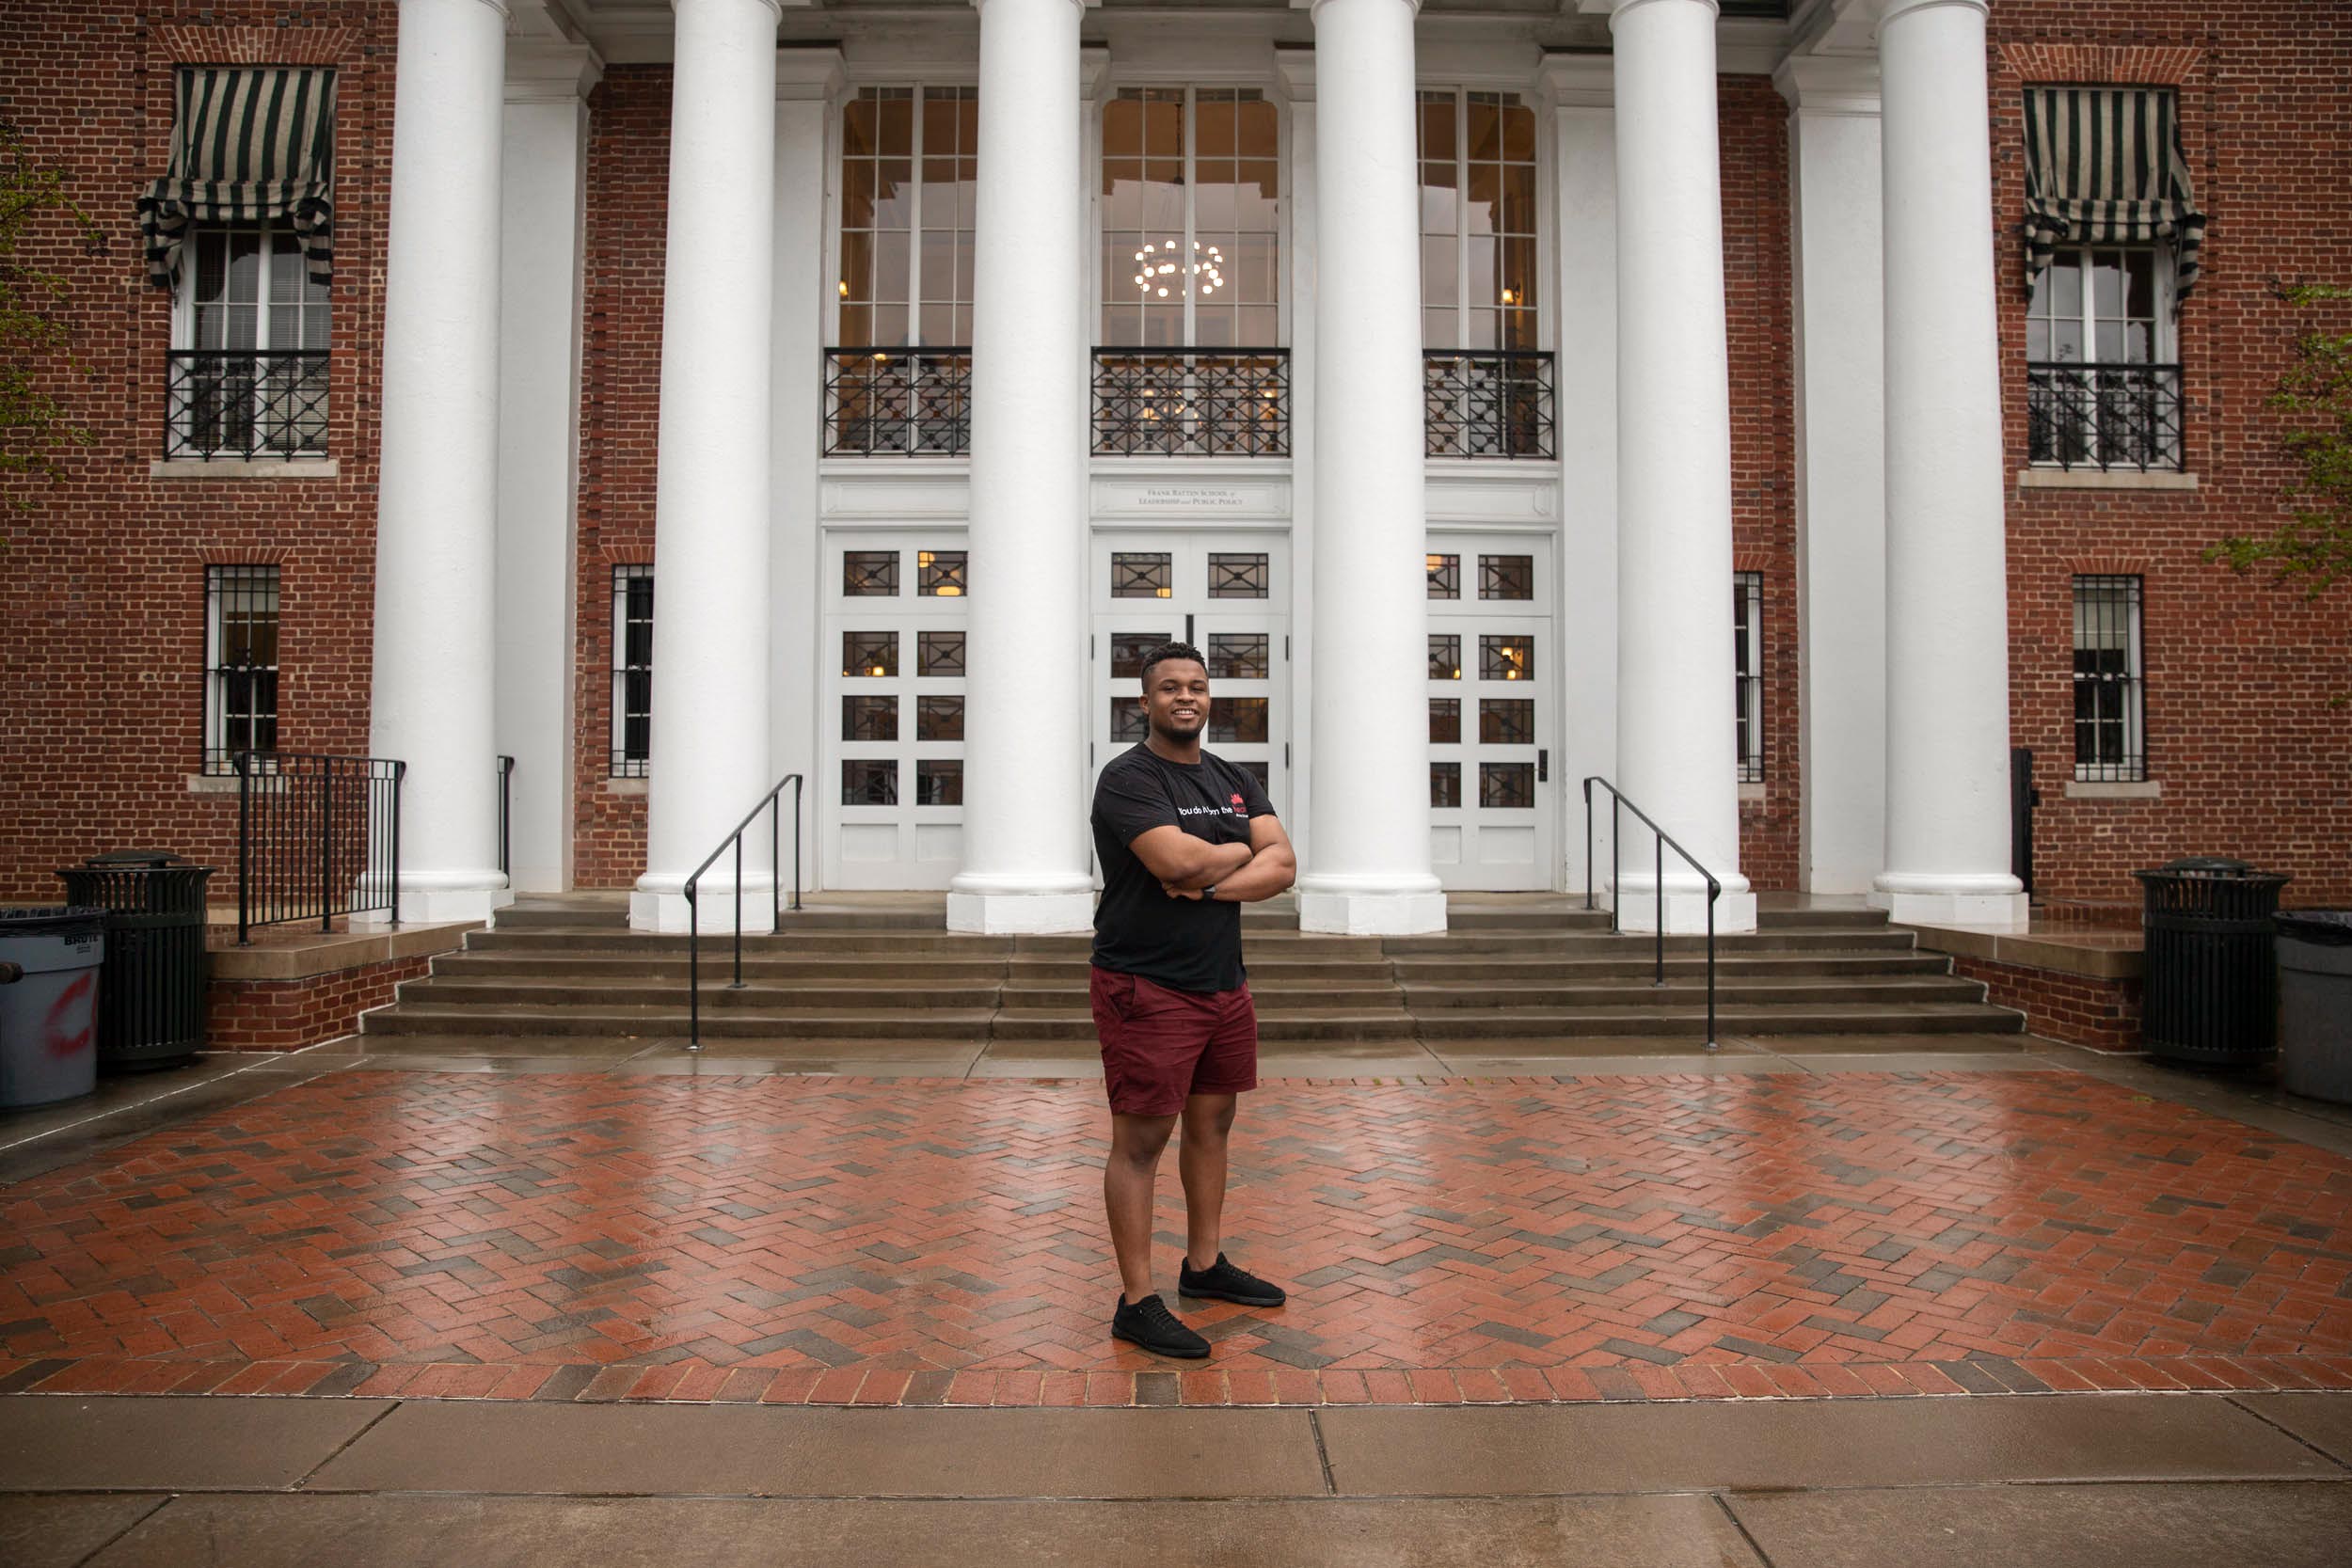 Duckettstanding in front of the Batten building with his arms crossed looking at the camera